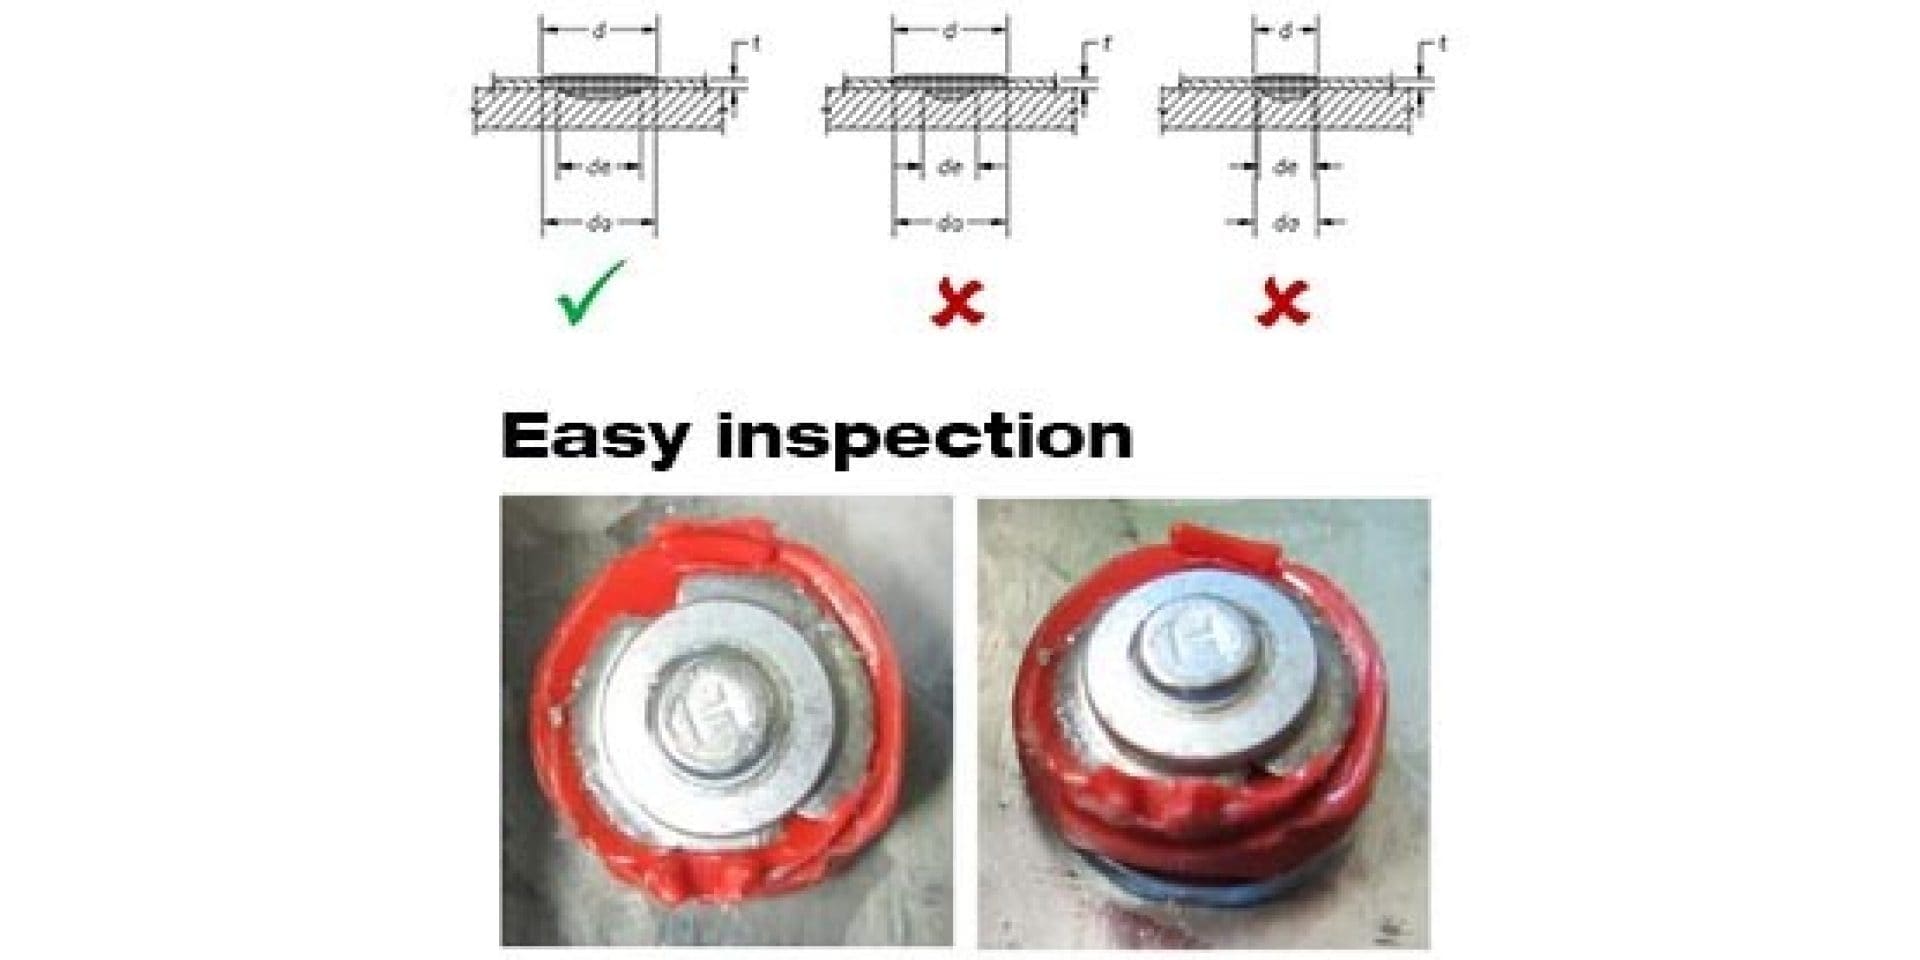 Hilti mechanical deck fasteners are easy to inspect